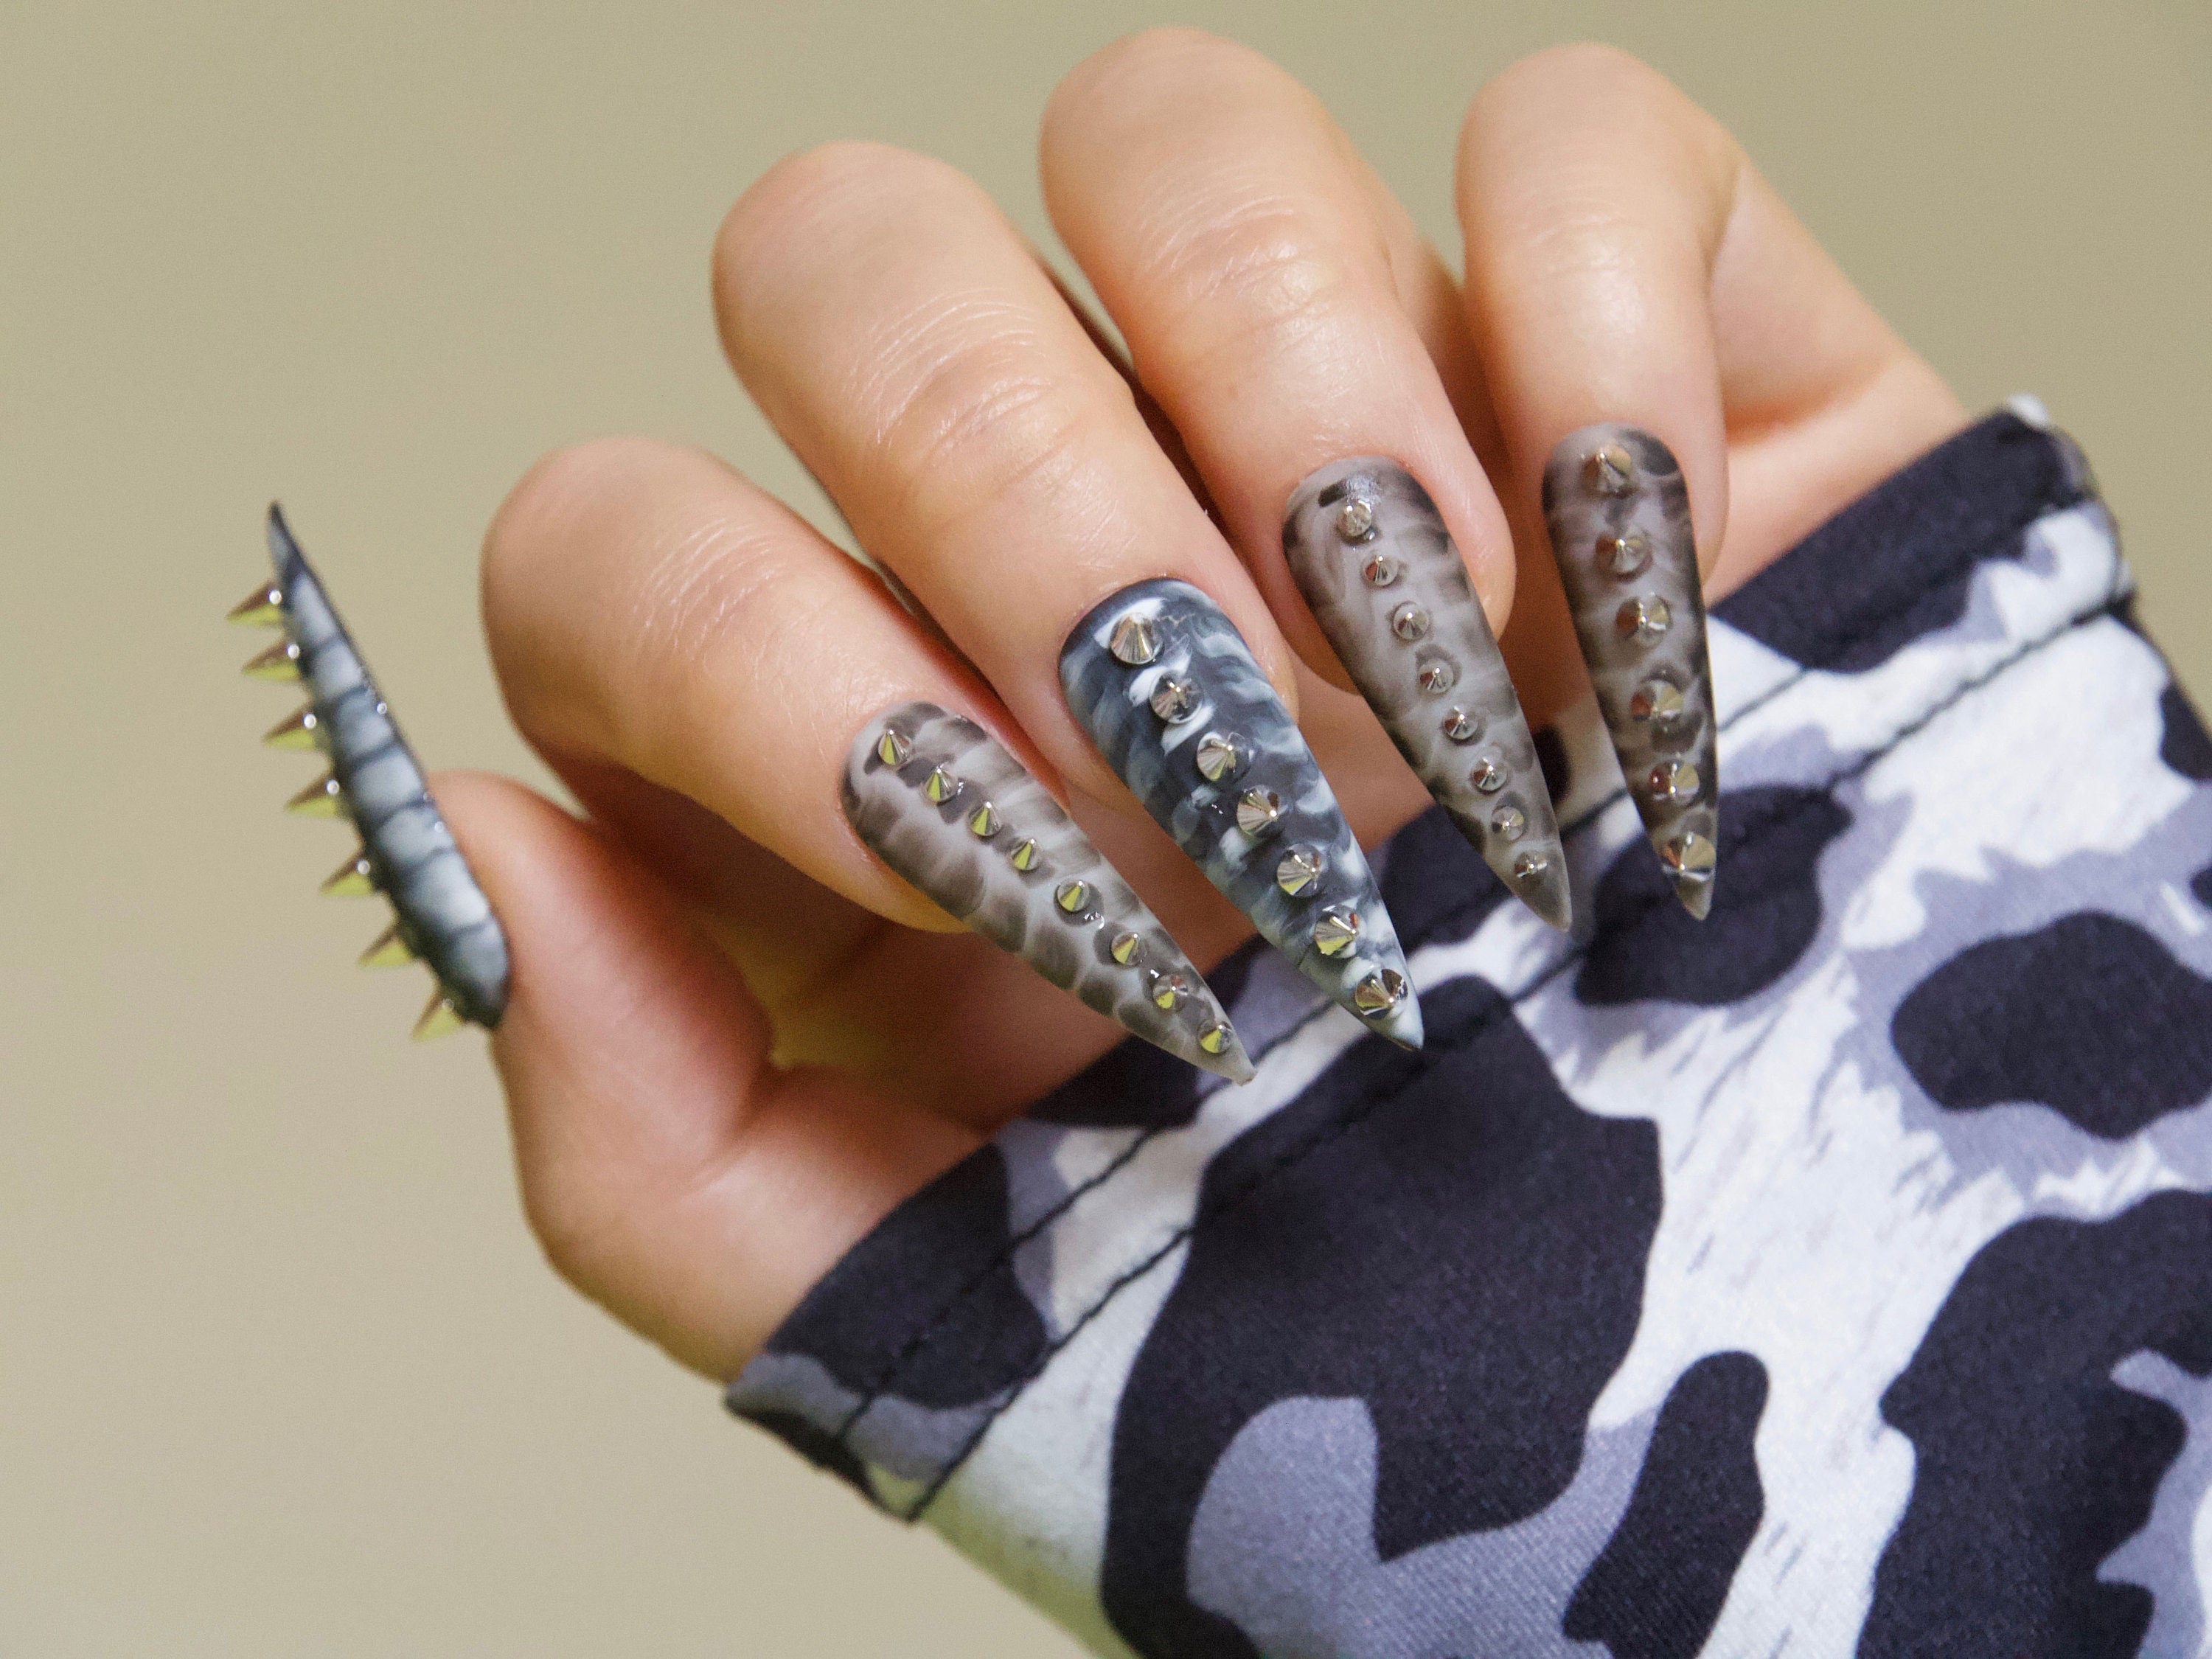 Extra Long Spiked Stiletto Press on Nails Black and Silver Fake Nails With  Spikes Biker Gothic Punk Style Deviant Claw Nails - Etsy